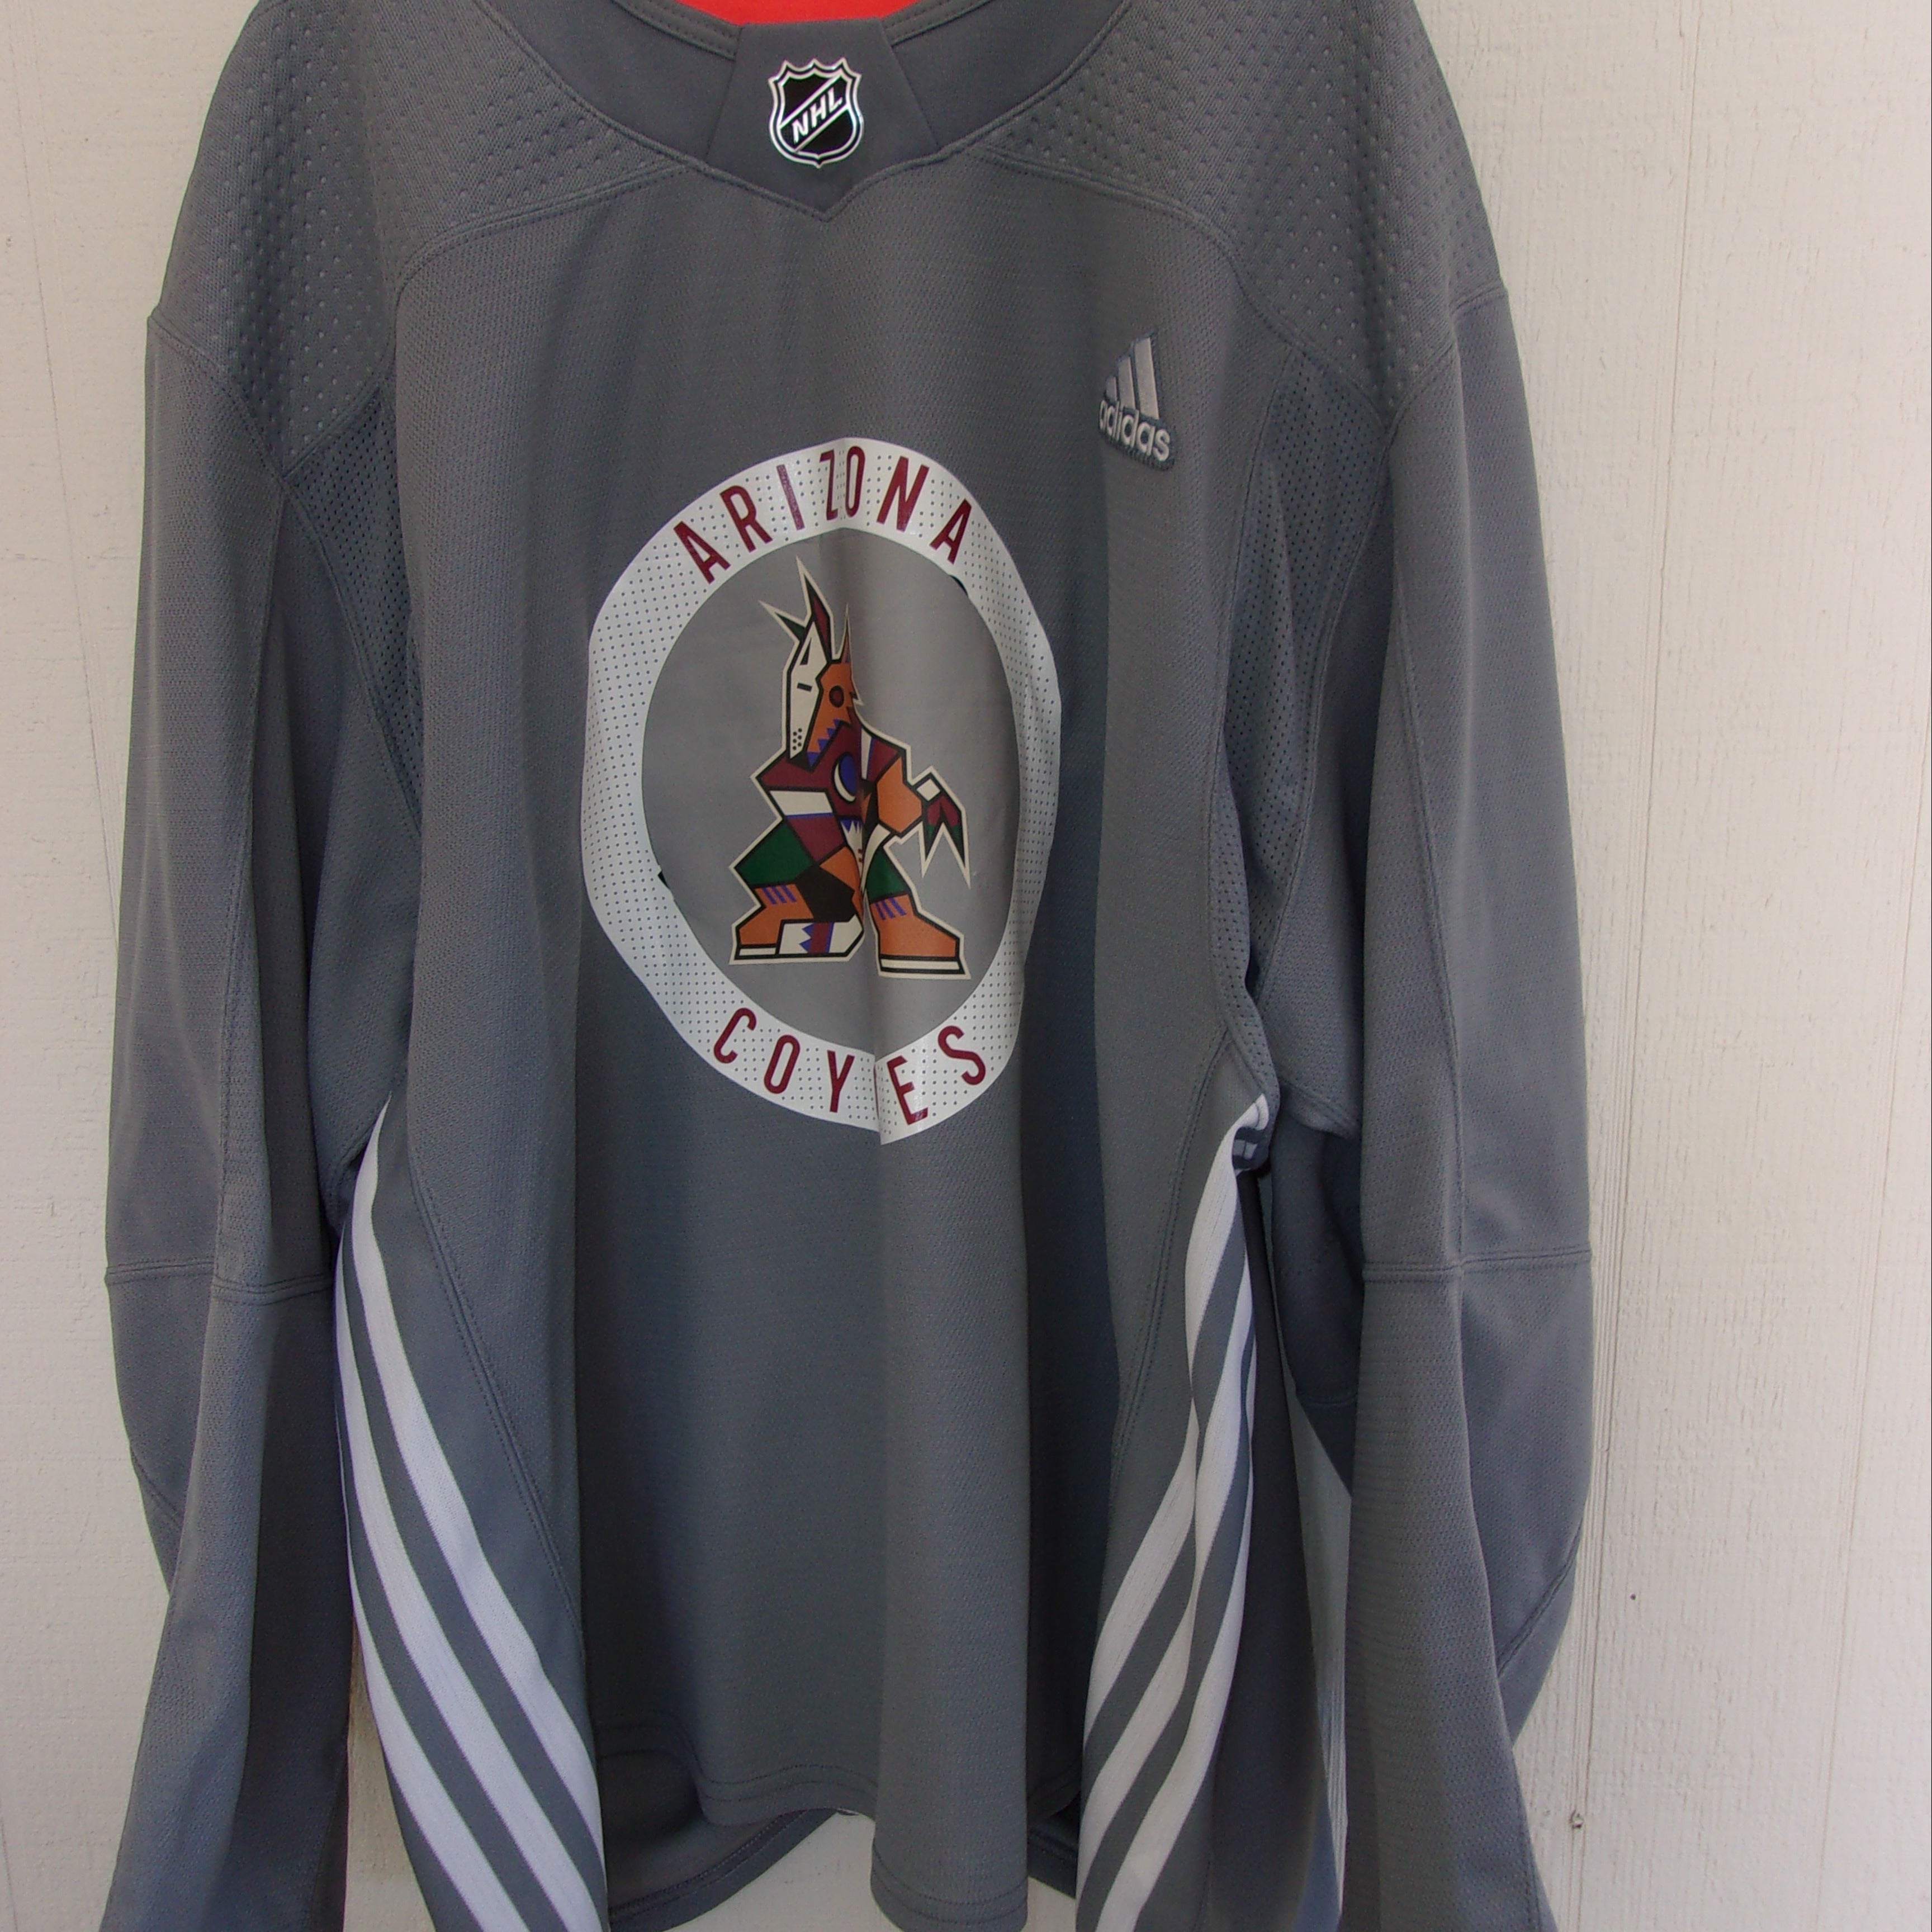 Arizona Coyotes unused/unnumbered red home Adidas game jersey from